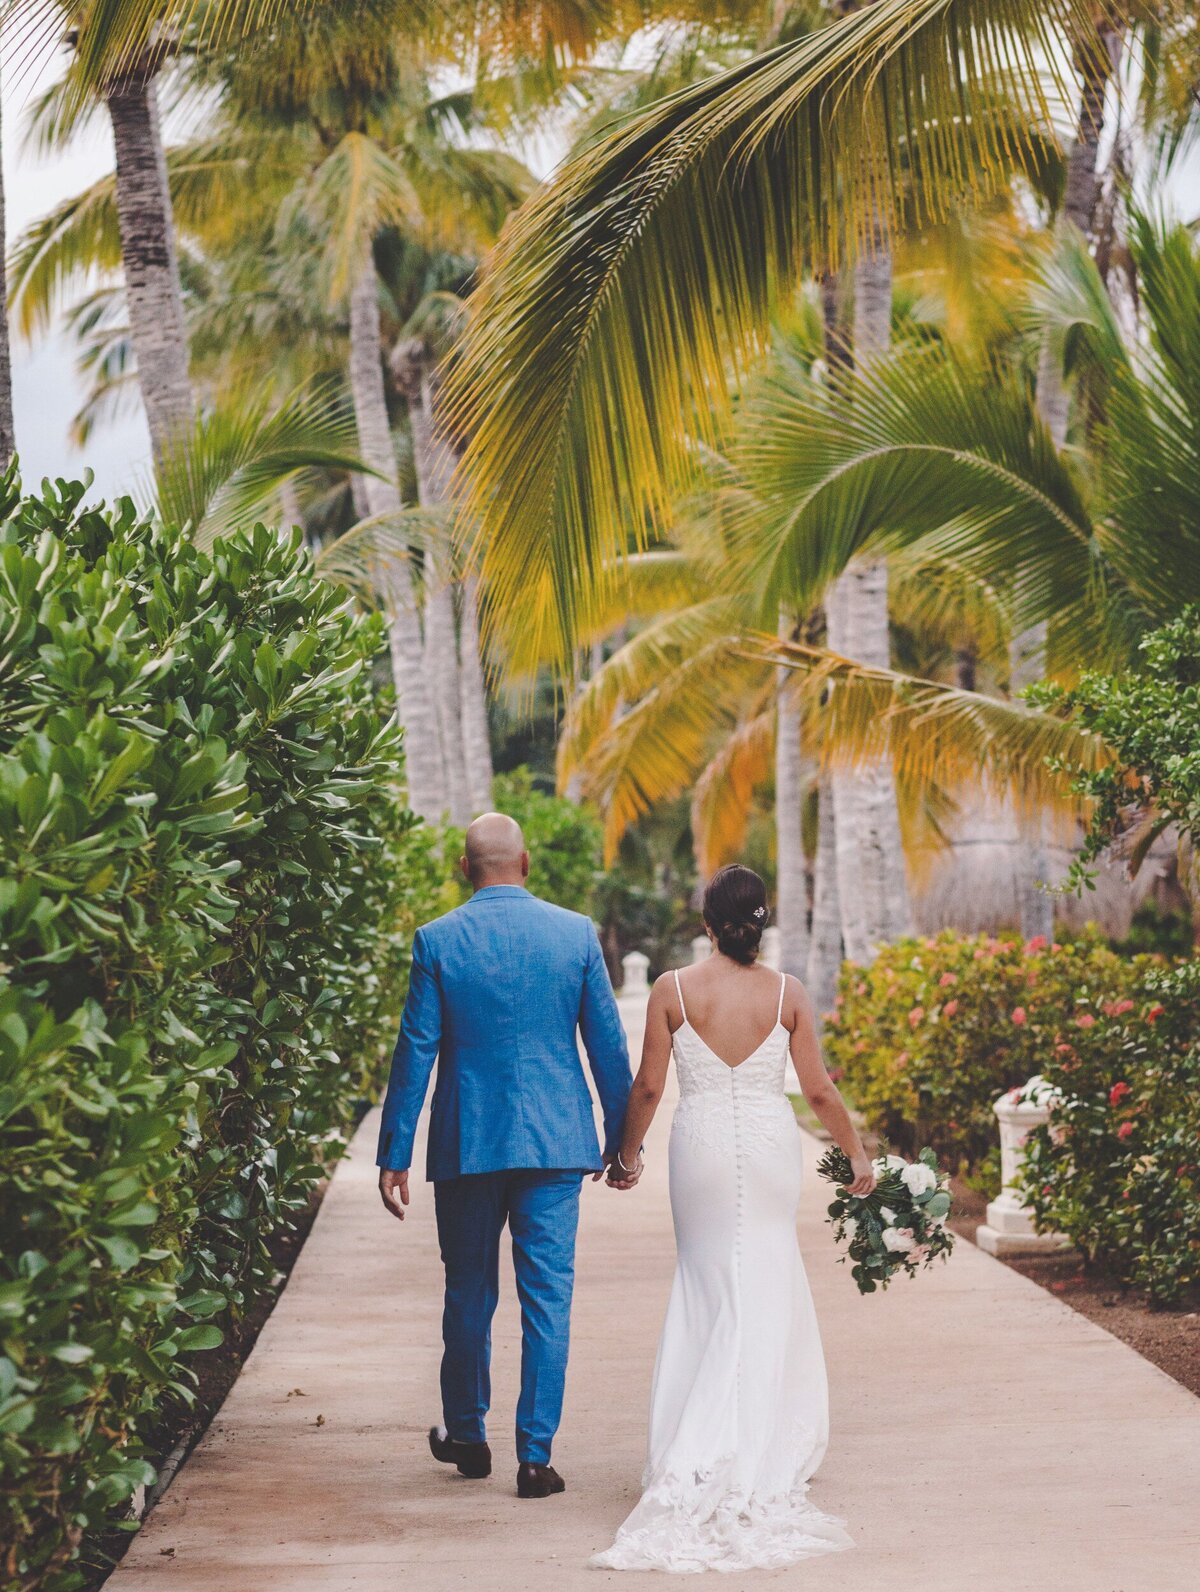 Bride and groom walking away on path with palm trees at wedding in Riviera Maya